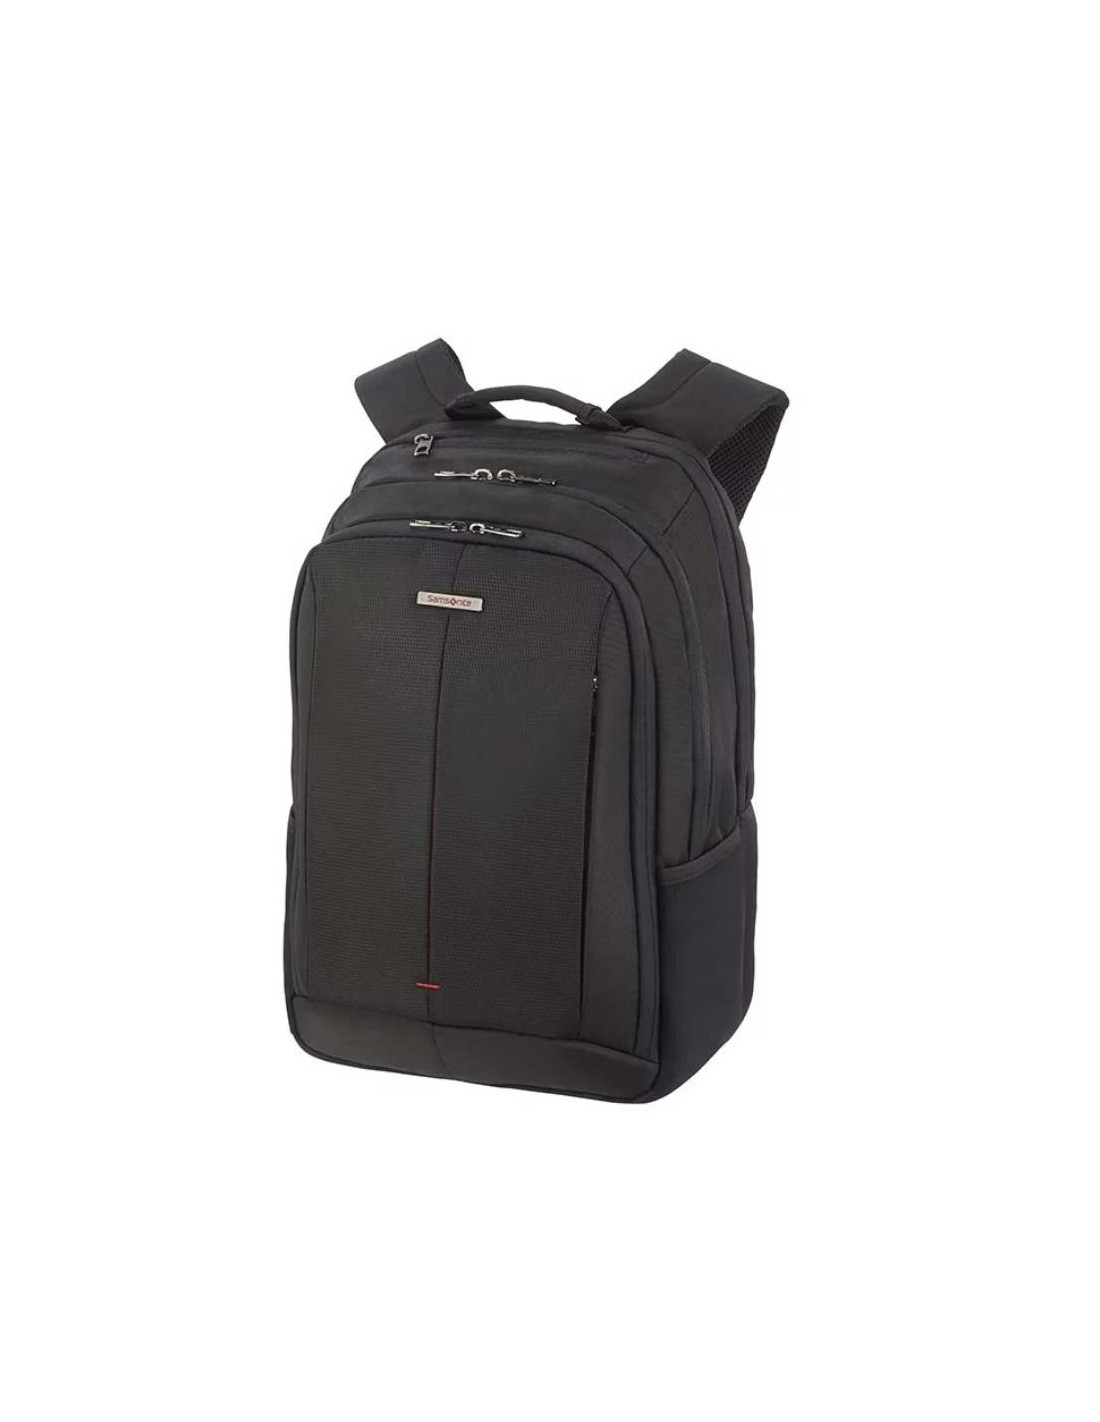 Samsonite Tectonic Nutech 17 in. Black Laptop Backpack With Smart Sleeve  145089-1041 - The Home Depot